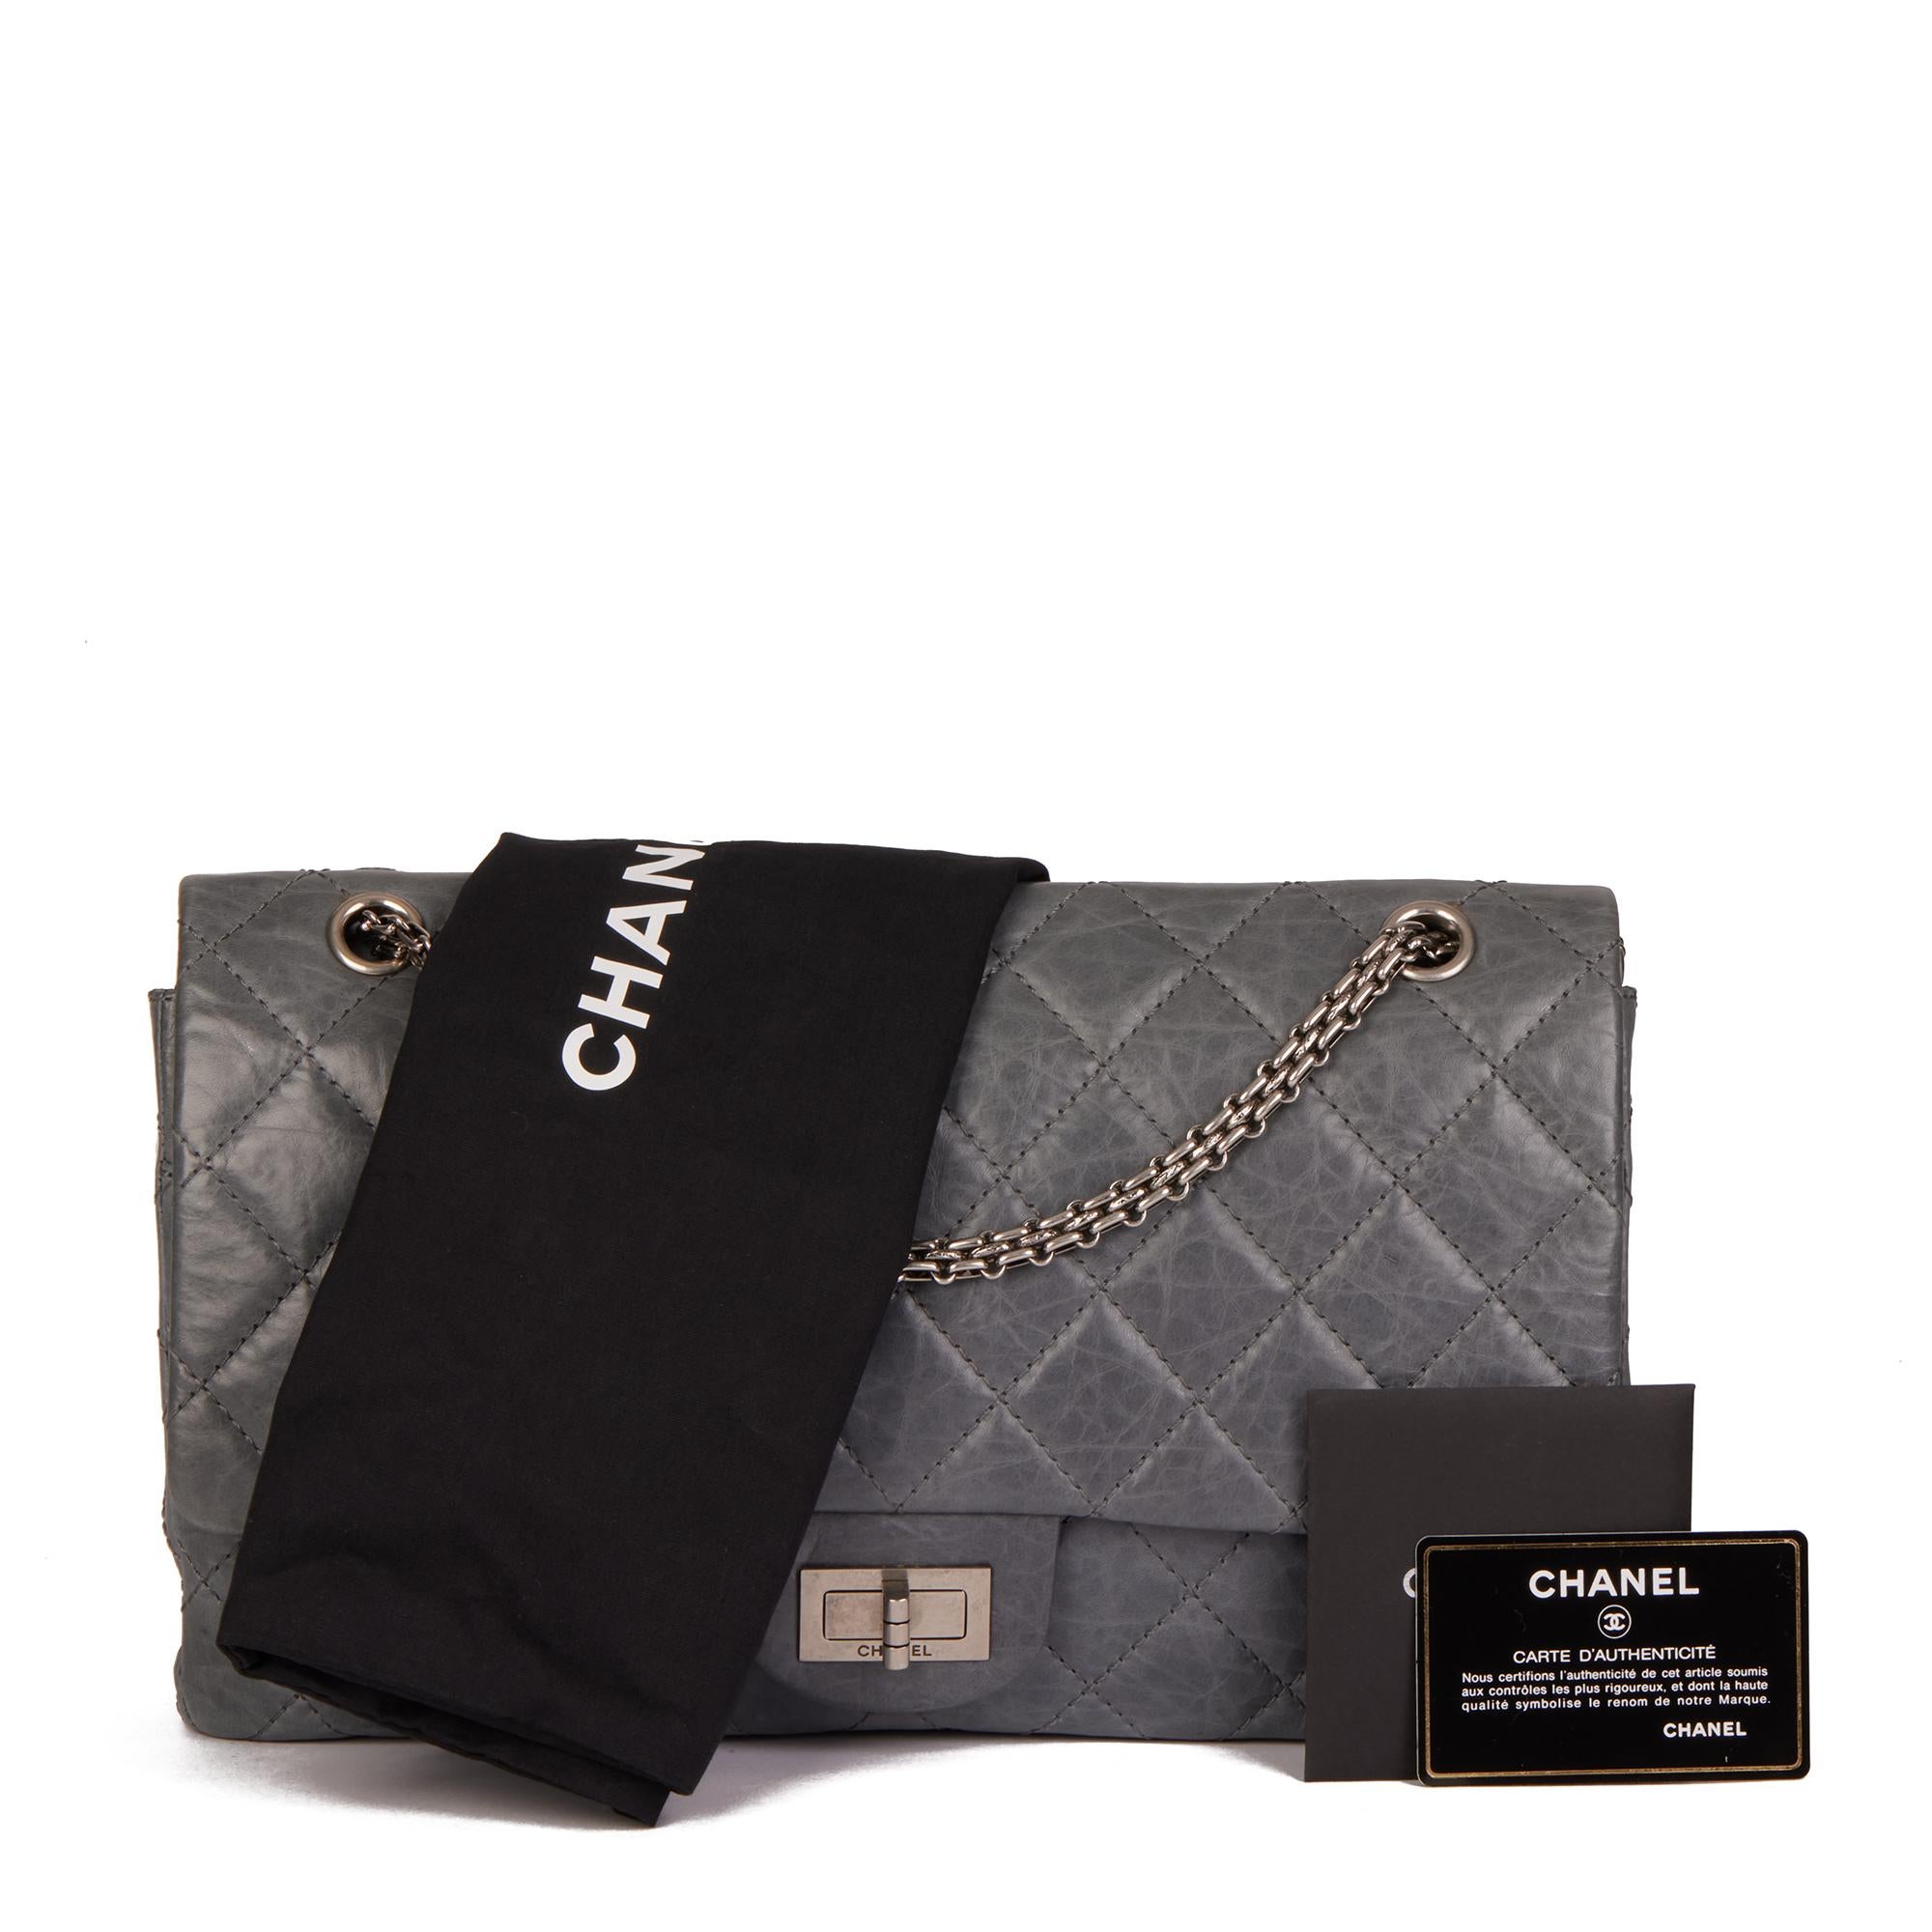 CHANEL Grey Quilted Aged Calfskin Leather 2005 50th Anniversary Edition 227 2.55 5